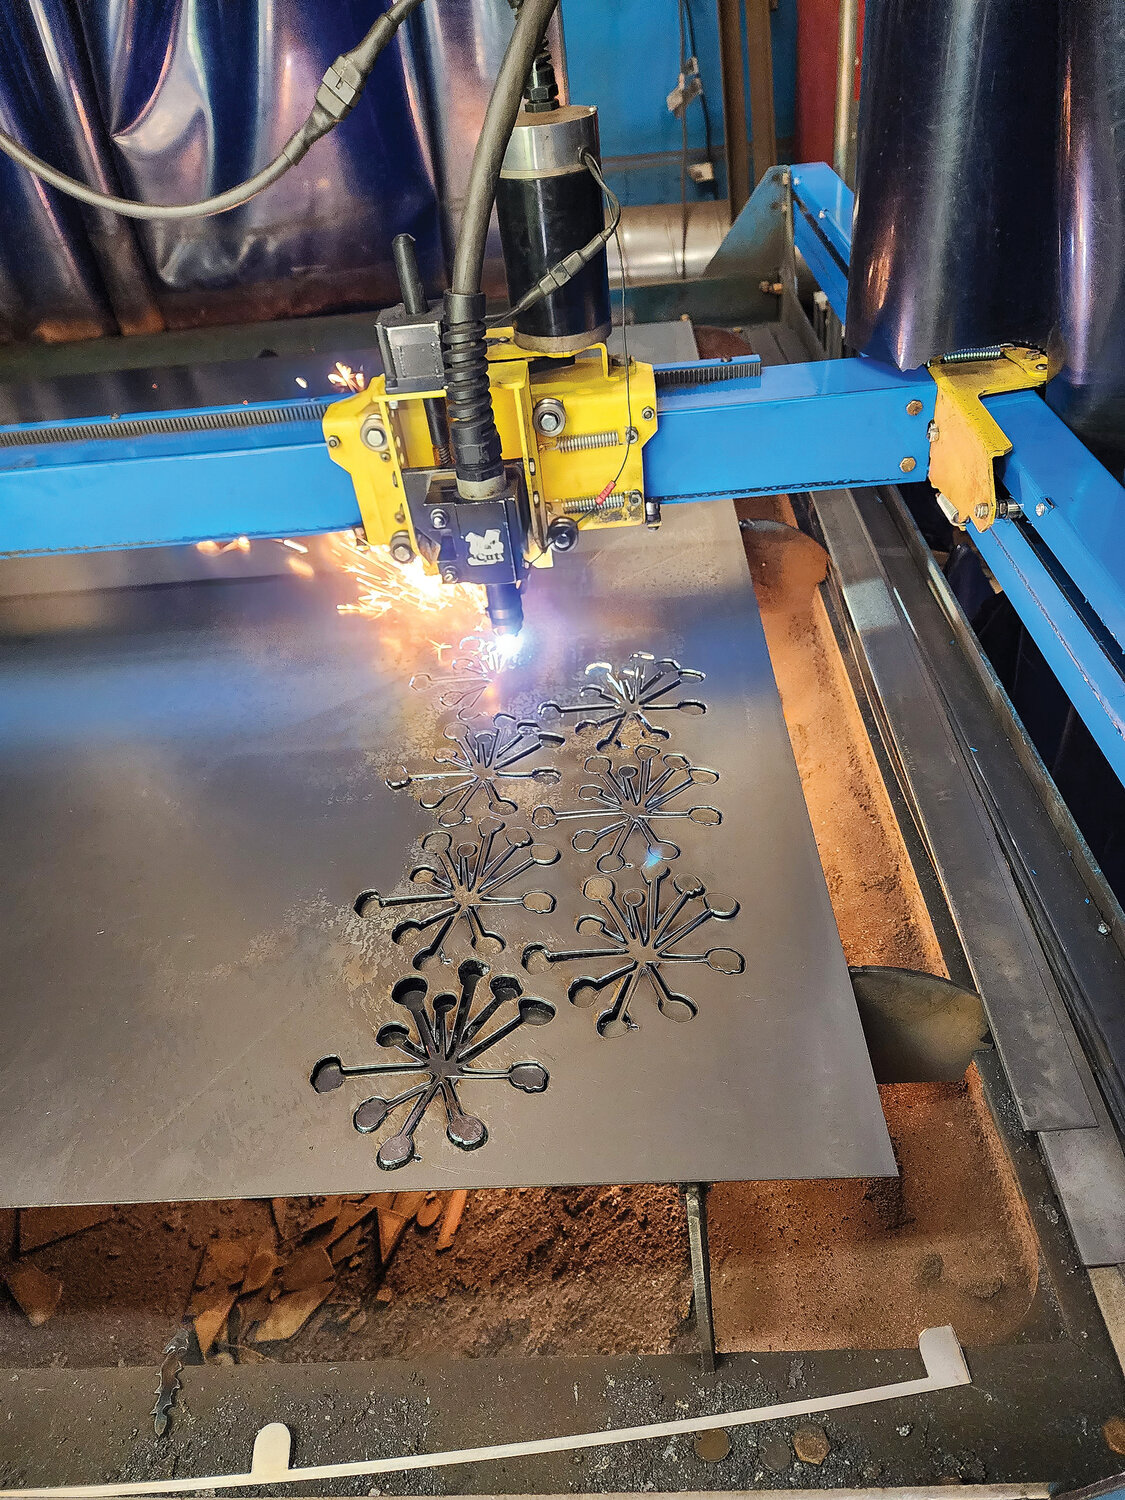 The CNC plasma table creates a design by Metal Art Fever on Friday, May 26.